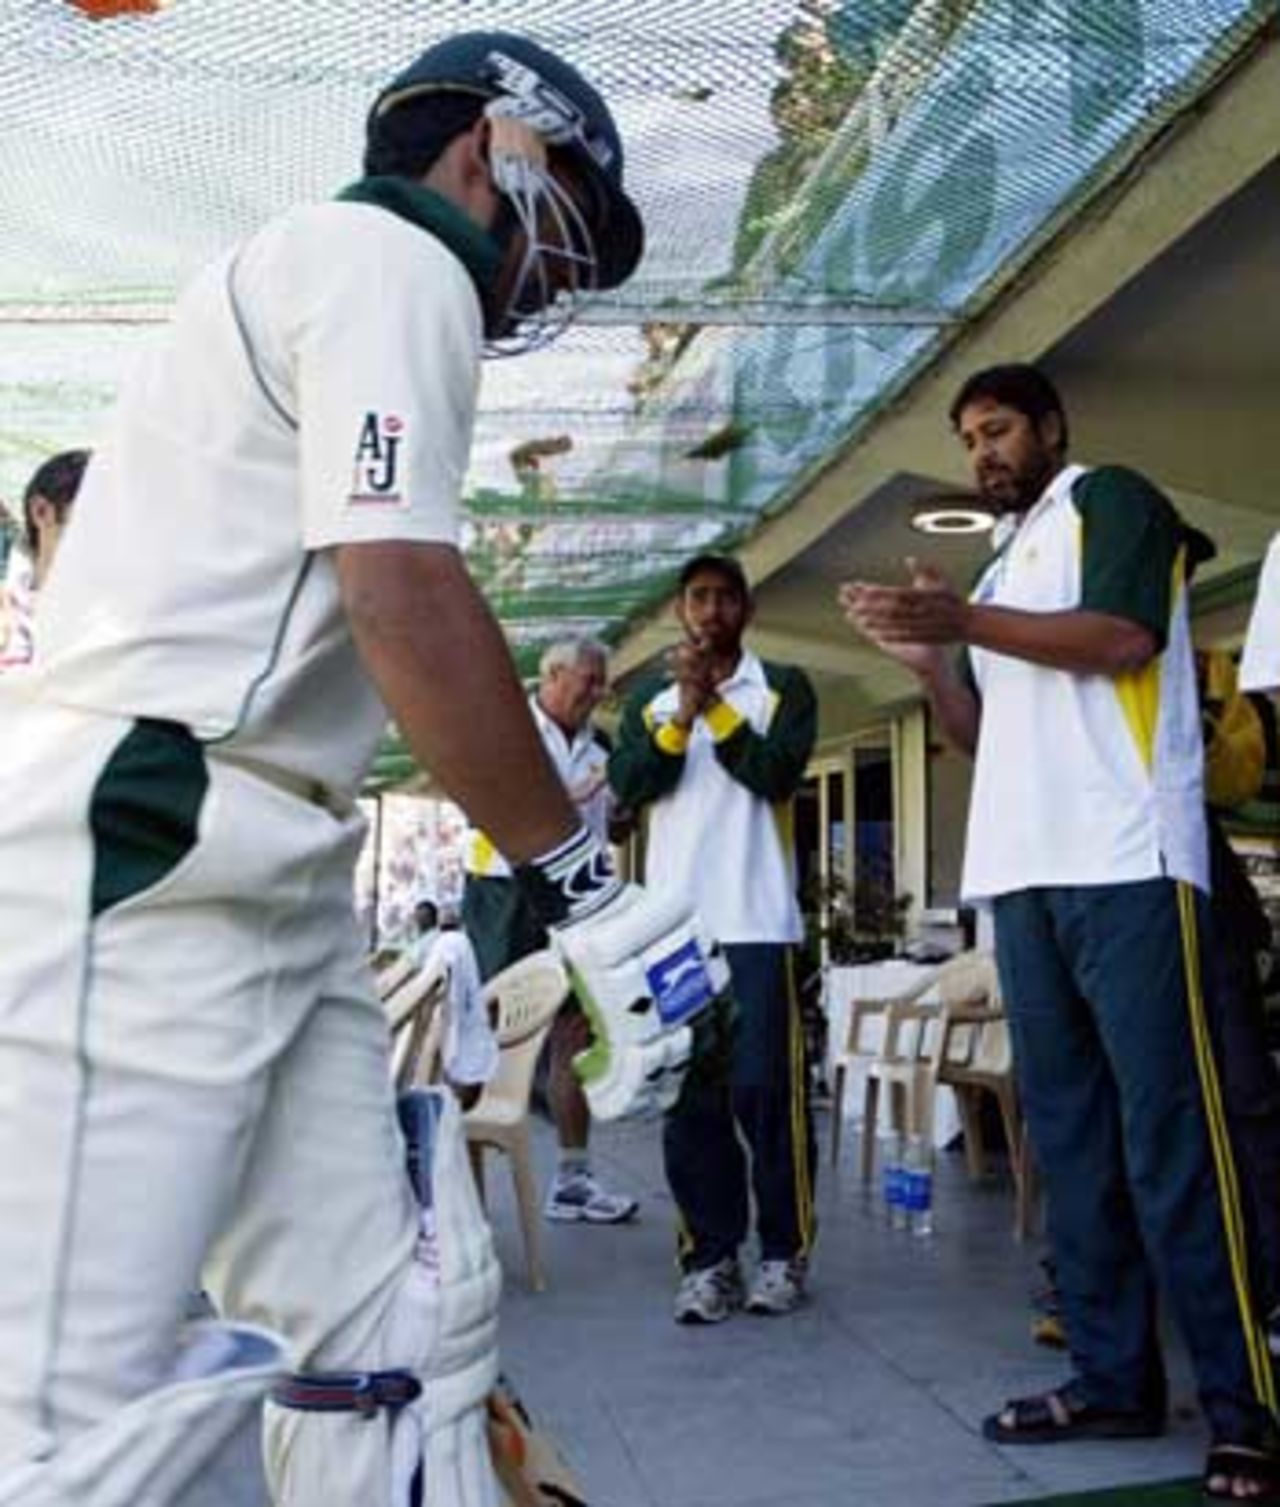 Kamran Akmal had done his bit, and the whole Pakistan team was on the dressing-room steps, appluading, as he walked back in, India v Pakistan, 1st Test, Mohali, 5th day, March 12, 2005